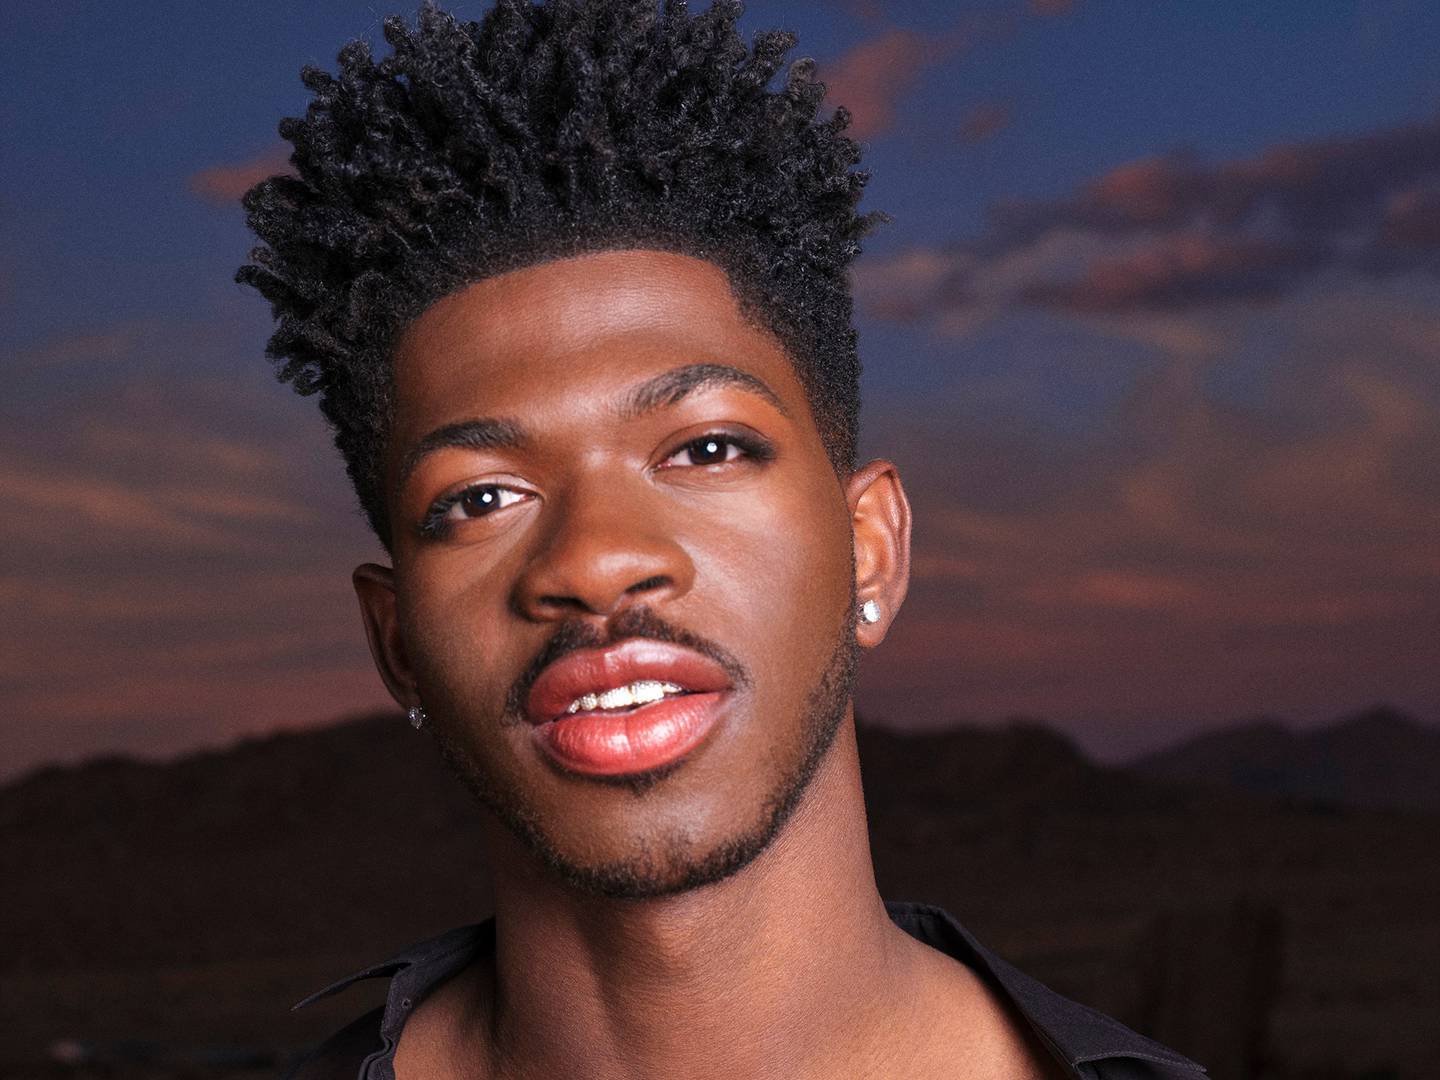 Yves Saint Laurent Beauté today announced rapper, singer and song-writer, Lil Nas X as its latest U.S. Ambassador.